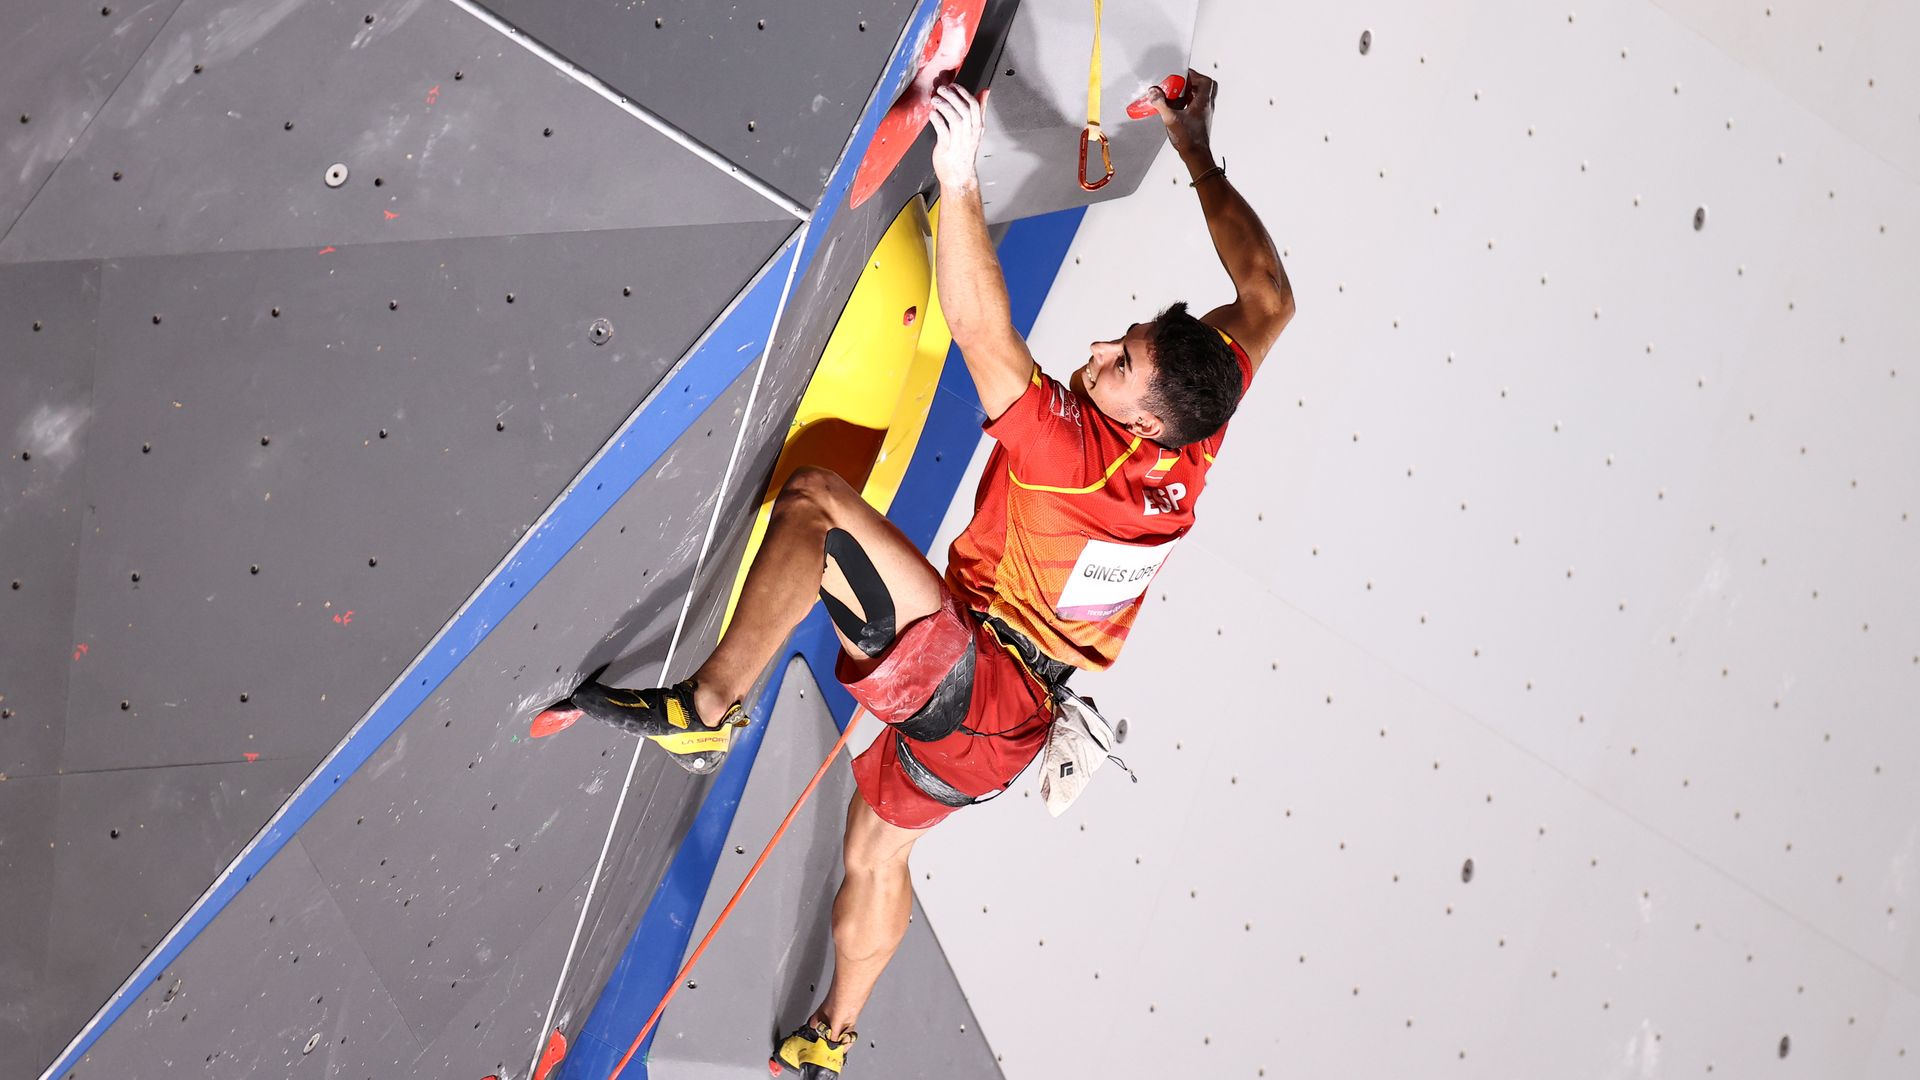 Alberto Gines Lopez of Team Spain during the Sport Climbing Men's Combined Final 